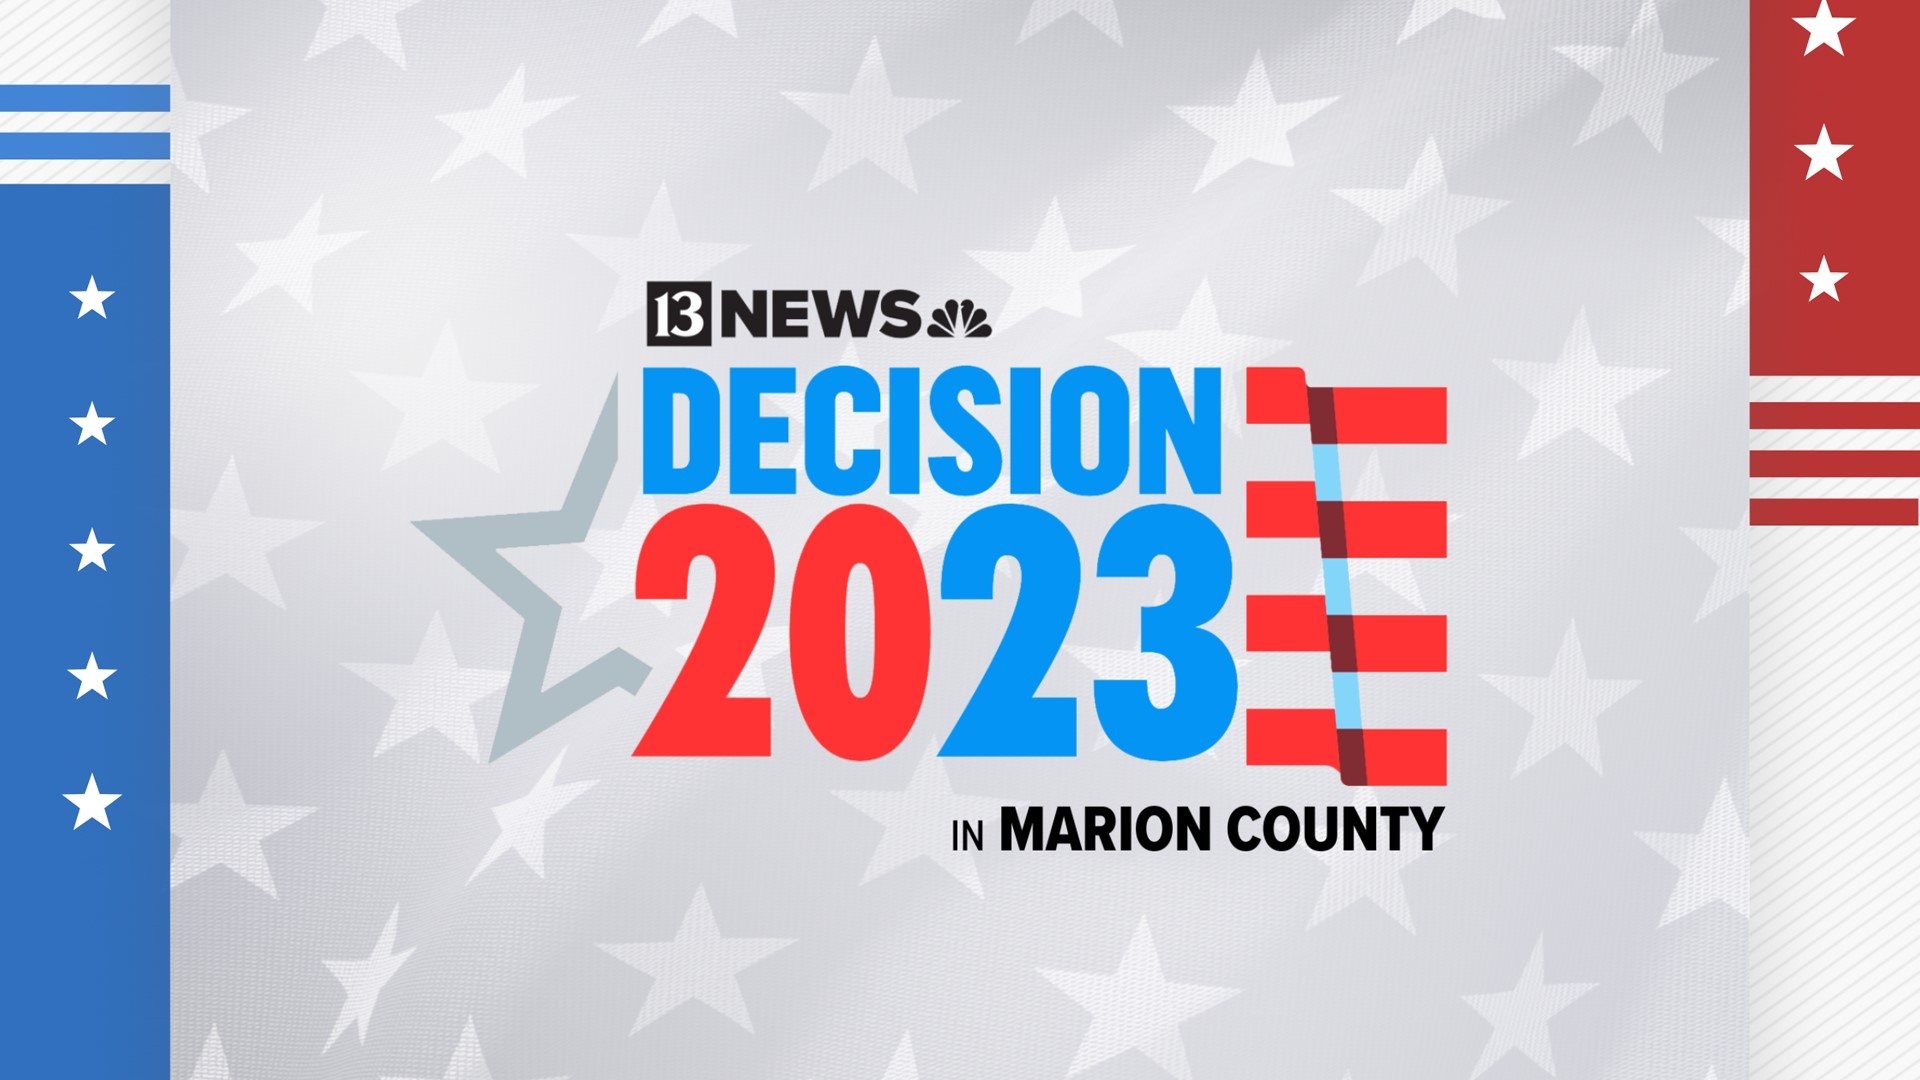 This month, 13News is looking at key issues impacting Marion County voters in the 2023 Election, including gun violence, housing and infrastructure.